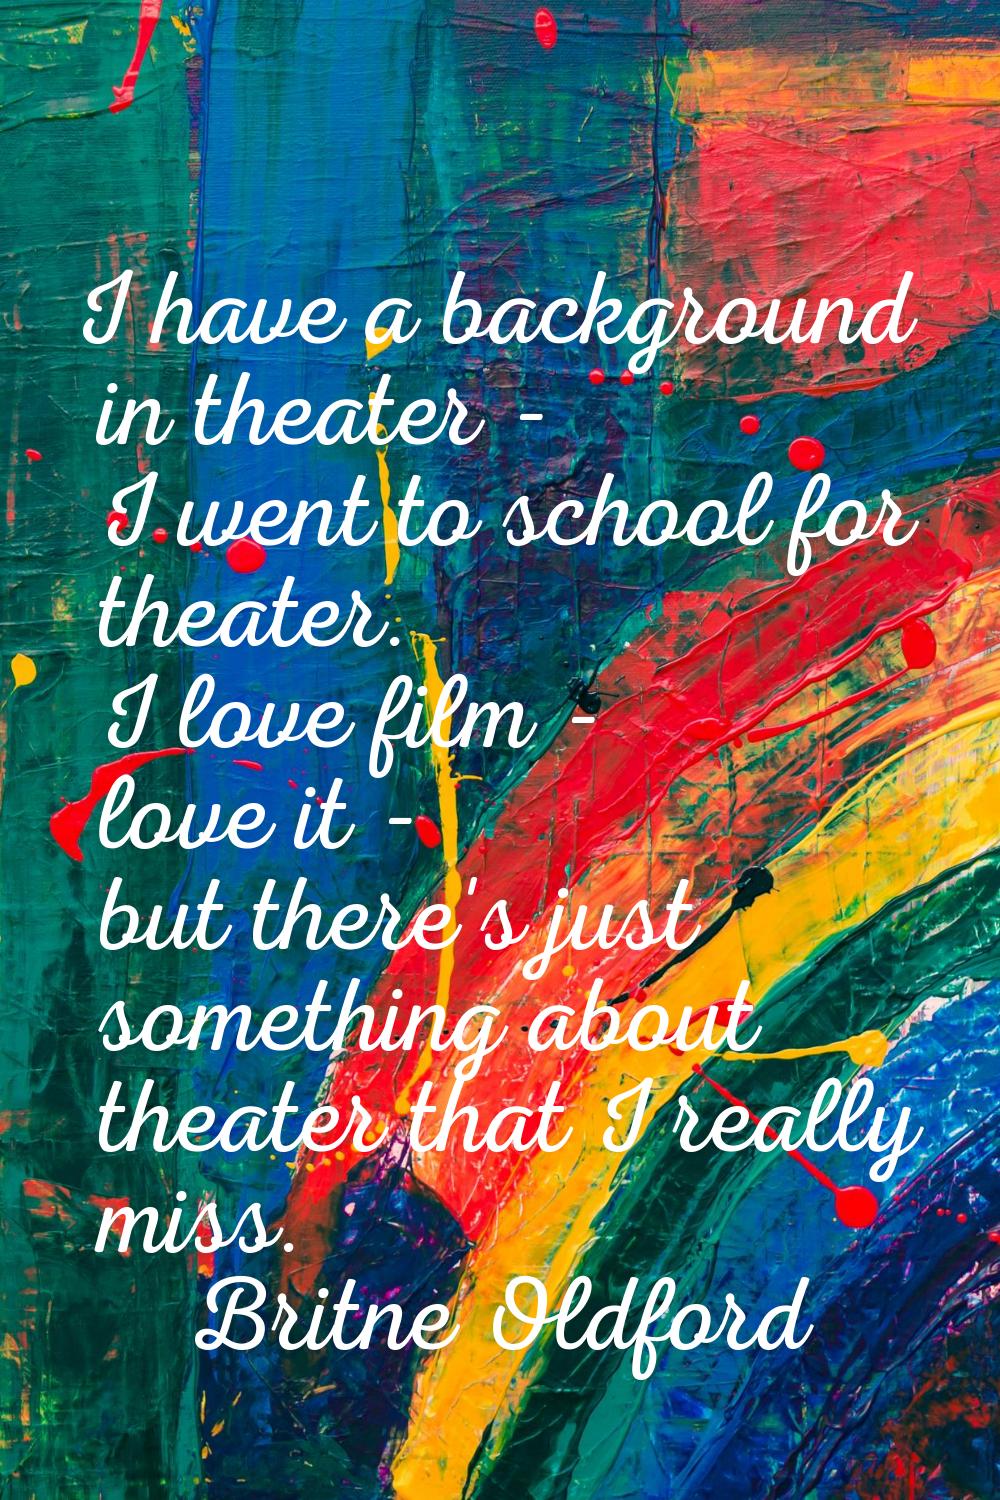 I have a background in theater - I went to school for theater. I love film - love it - but there's 